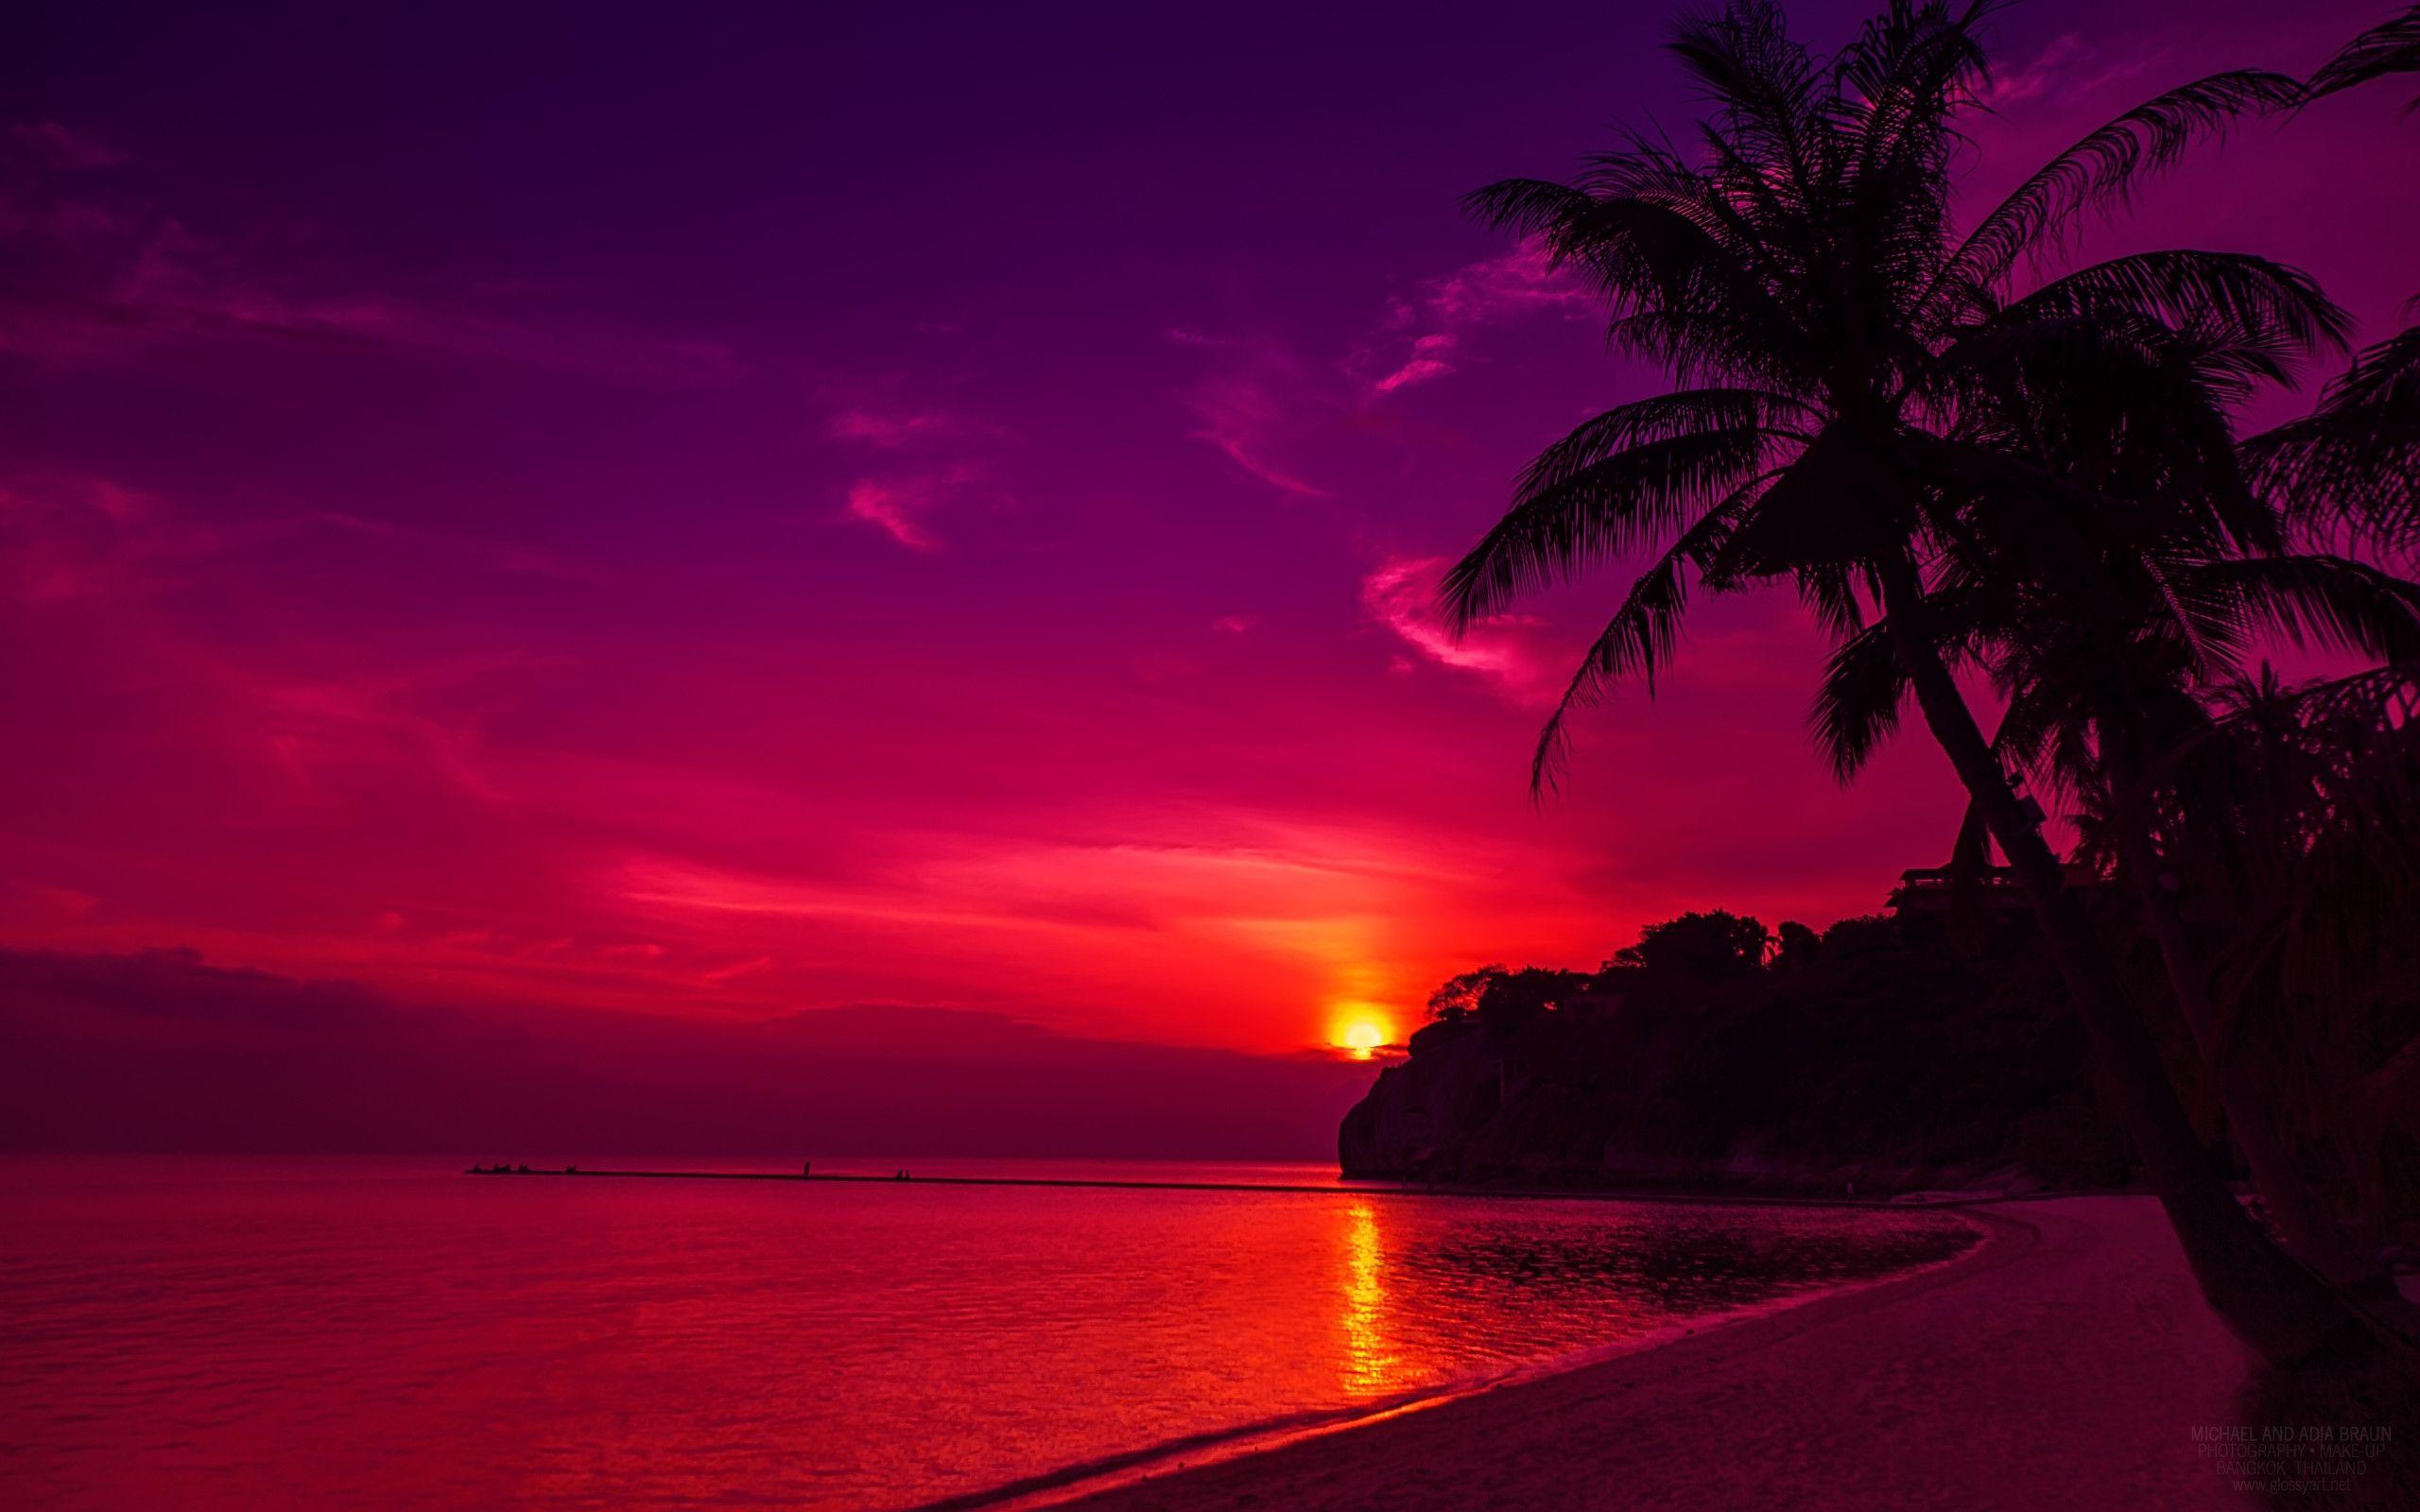 Tropical Island Sunset Wallpaper (the best image in 2018)